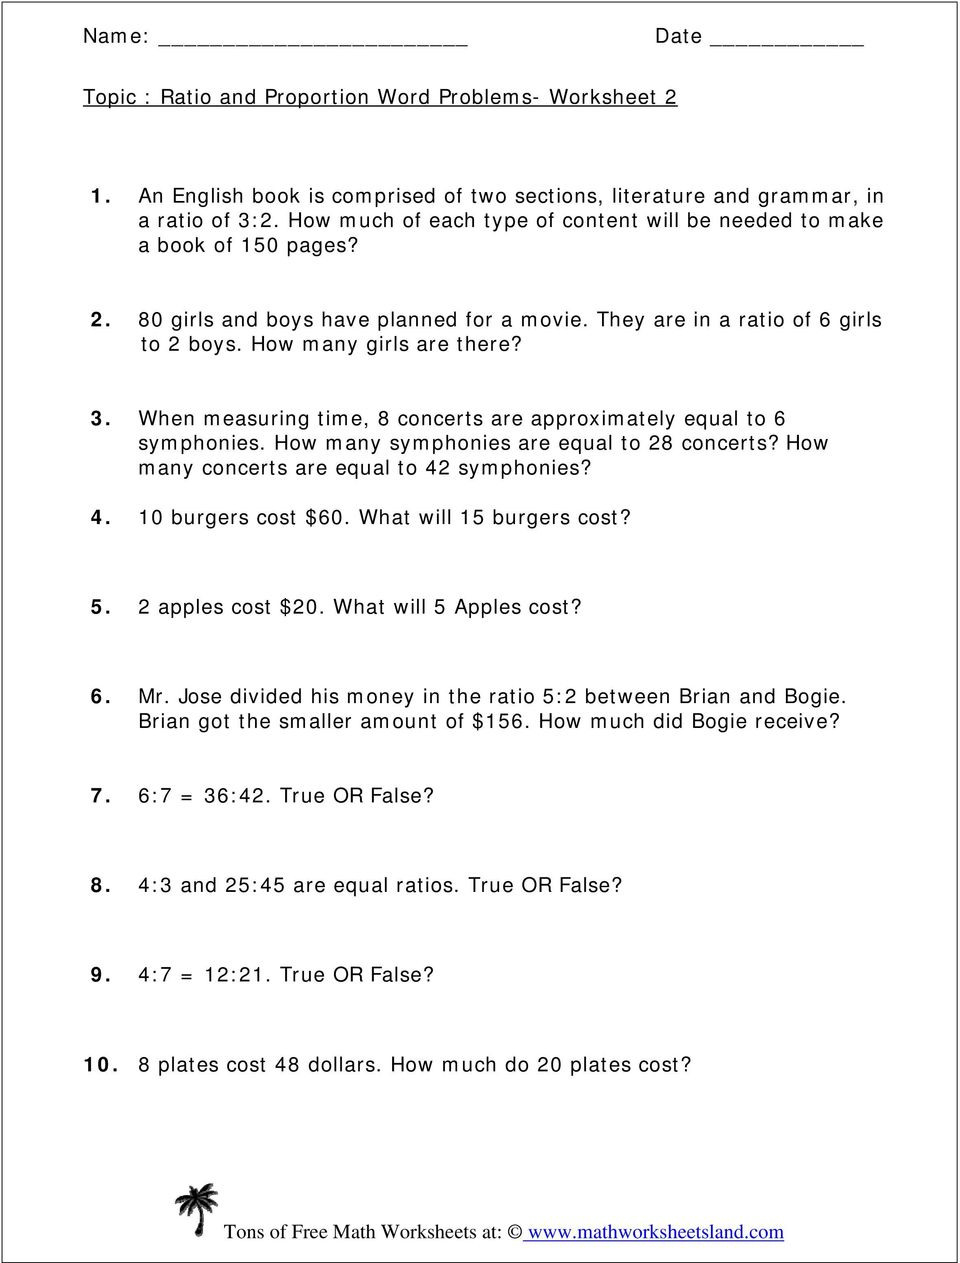 ratio-and-proportion-word-problems-worksheets-with-answers